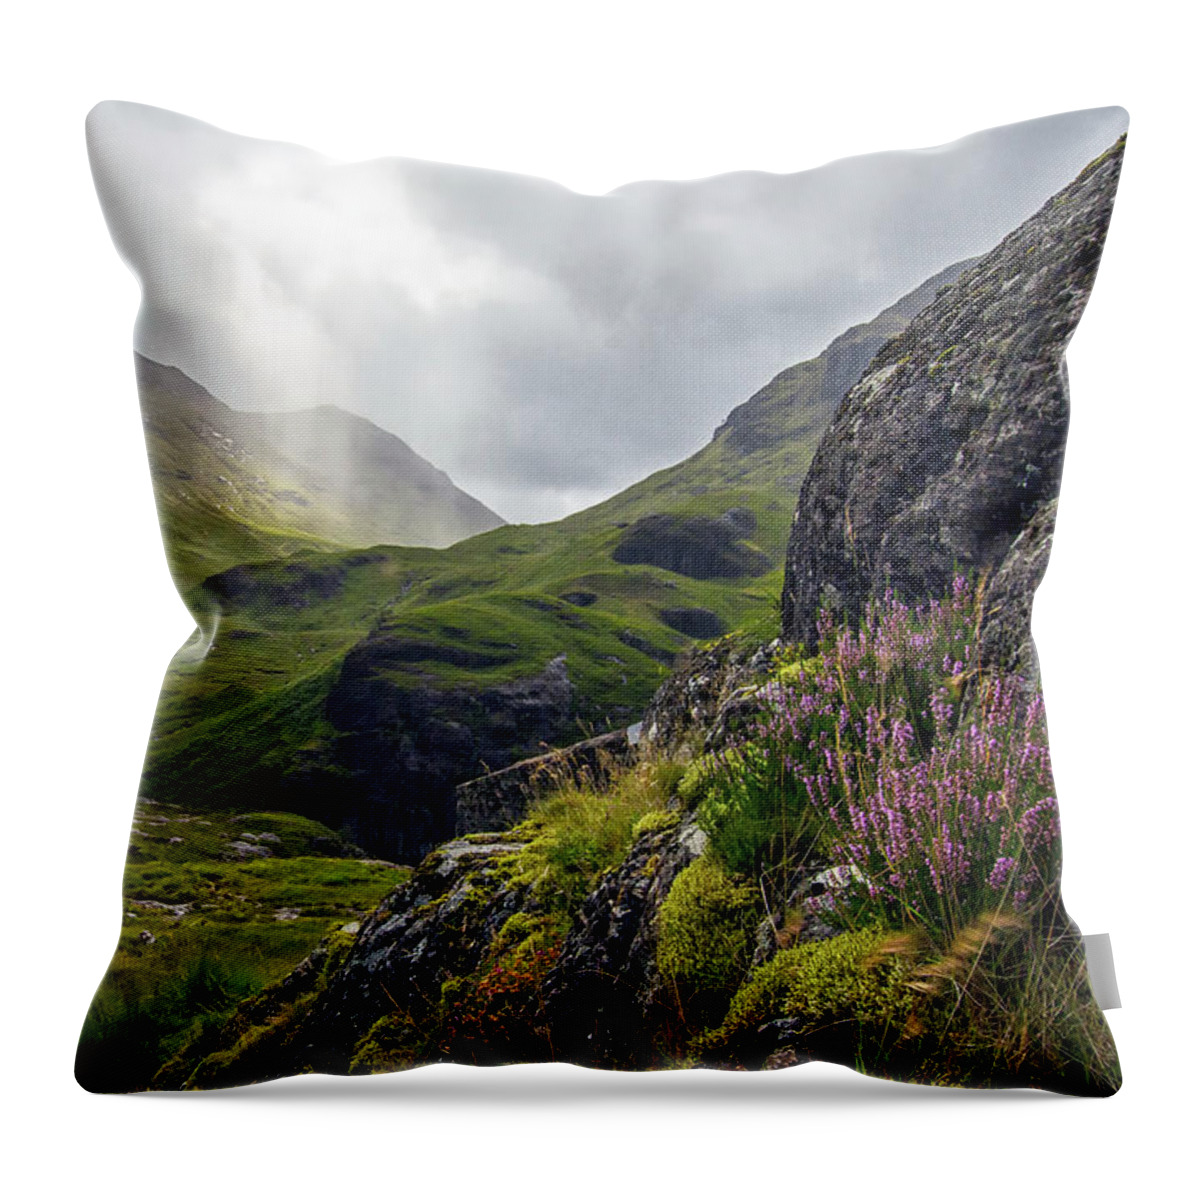 Scenics Throw Pillow featuring the photograph On-the-rocks by Photograph Mike Whittaker